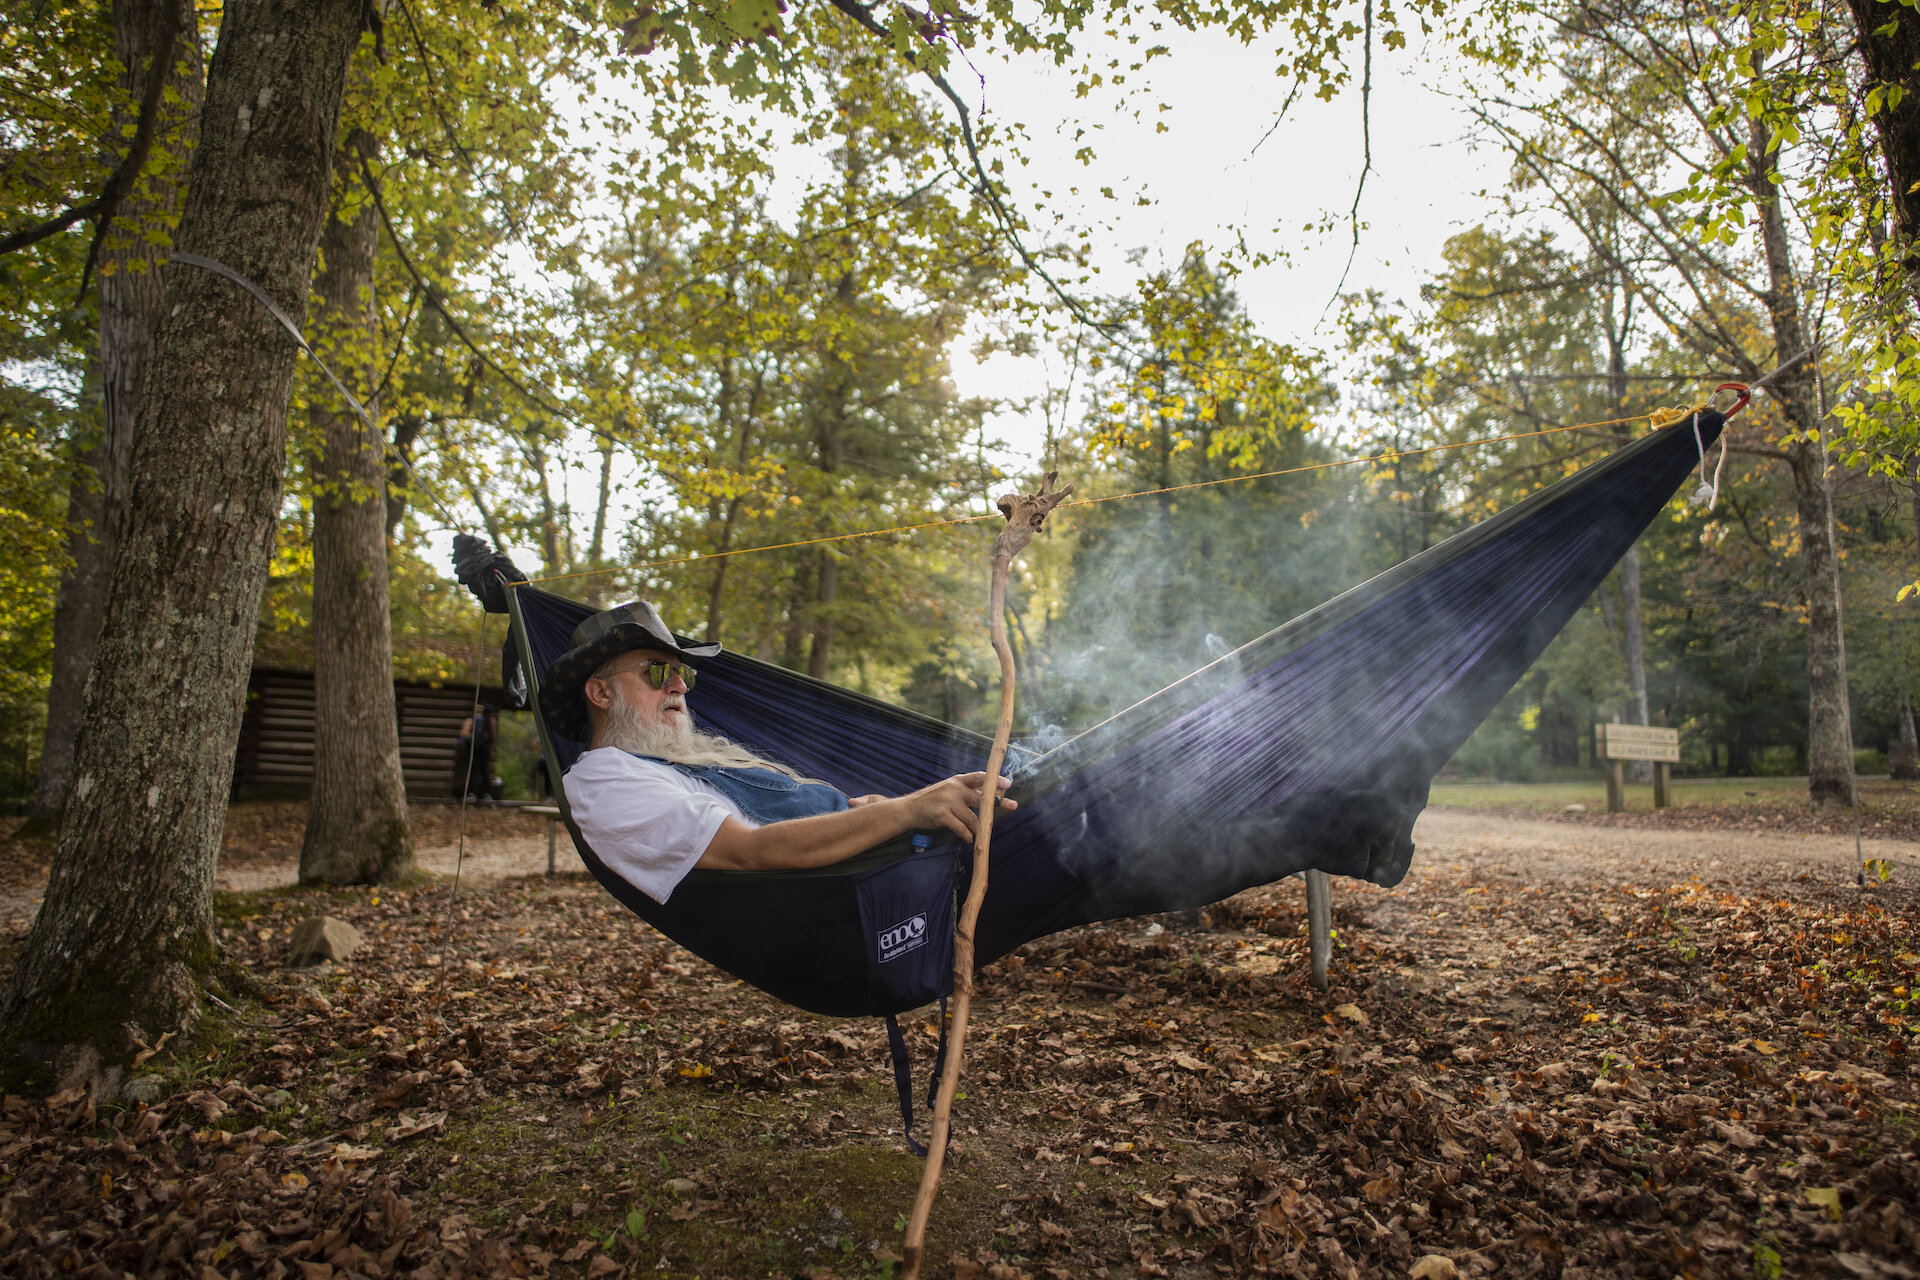  A man named “Russ” lays in his hammock outside of the Old Man’s Cave Visitors center in Hocking Hills, Ohio, on Saturday, September 28, 2019.  